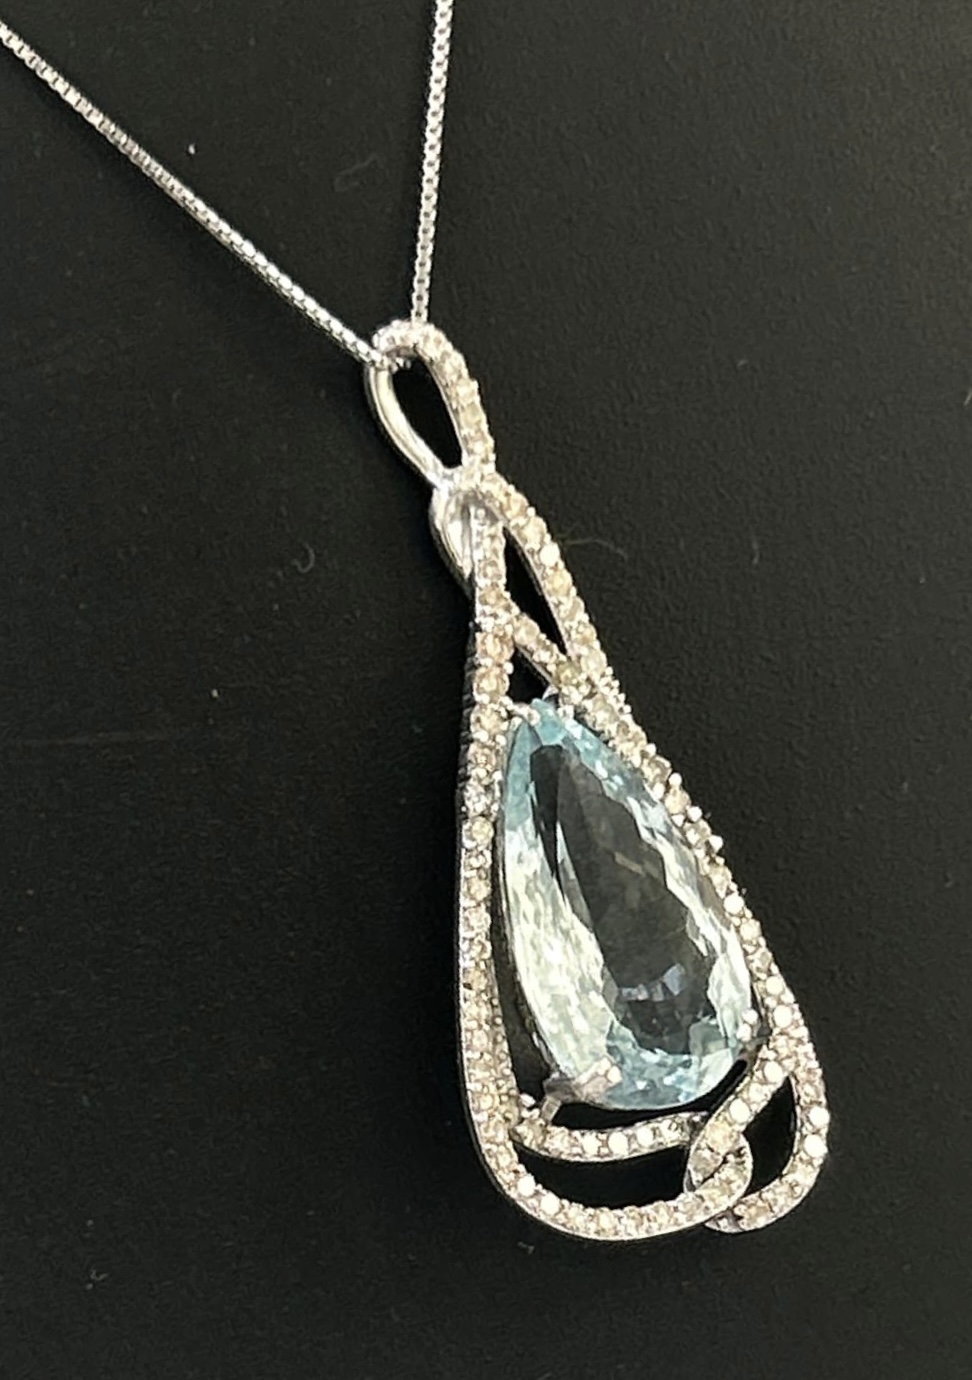 Beautiful Natural Flawless 8.81 CT Aquamarine Pendant With Diamonds and 18k Gold - Image 3 of 8